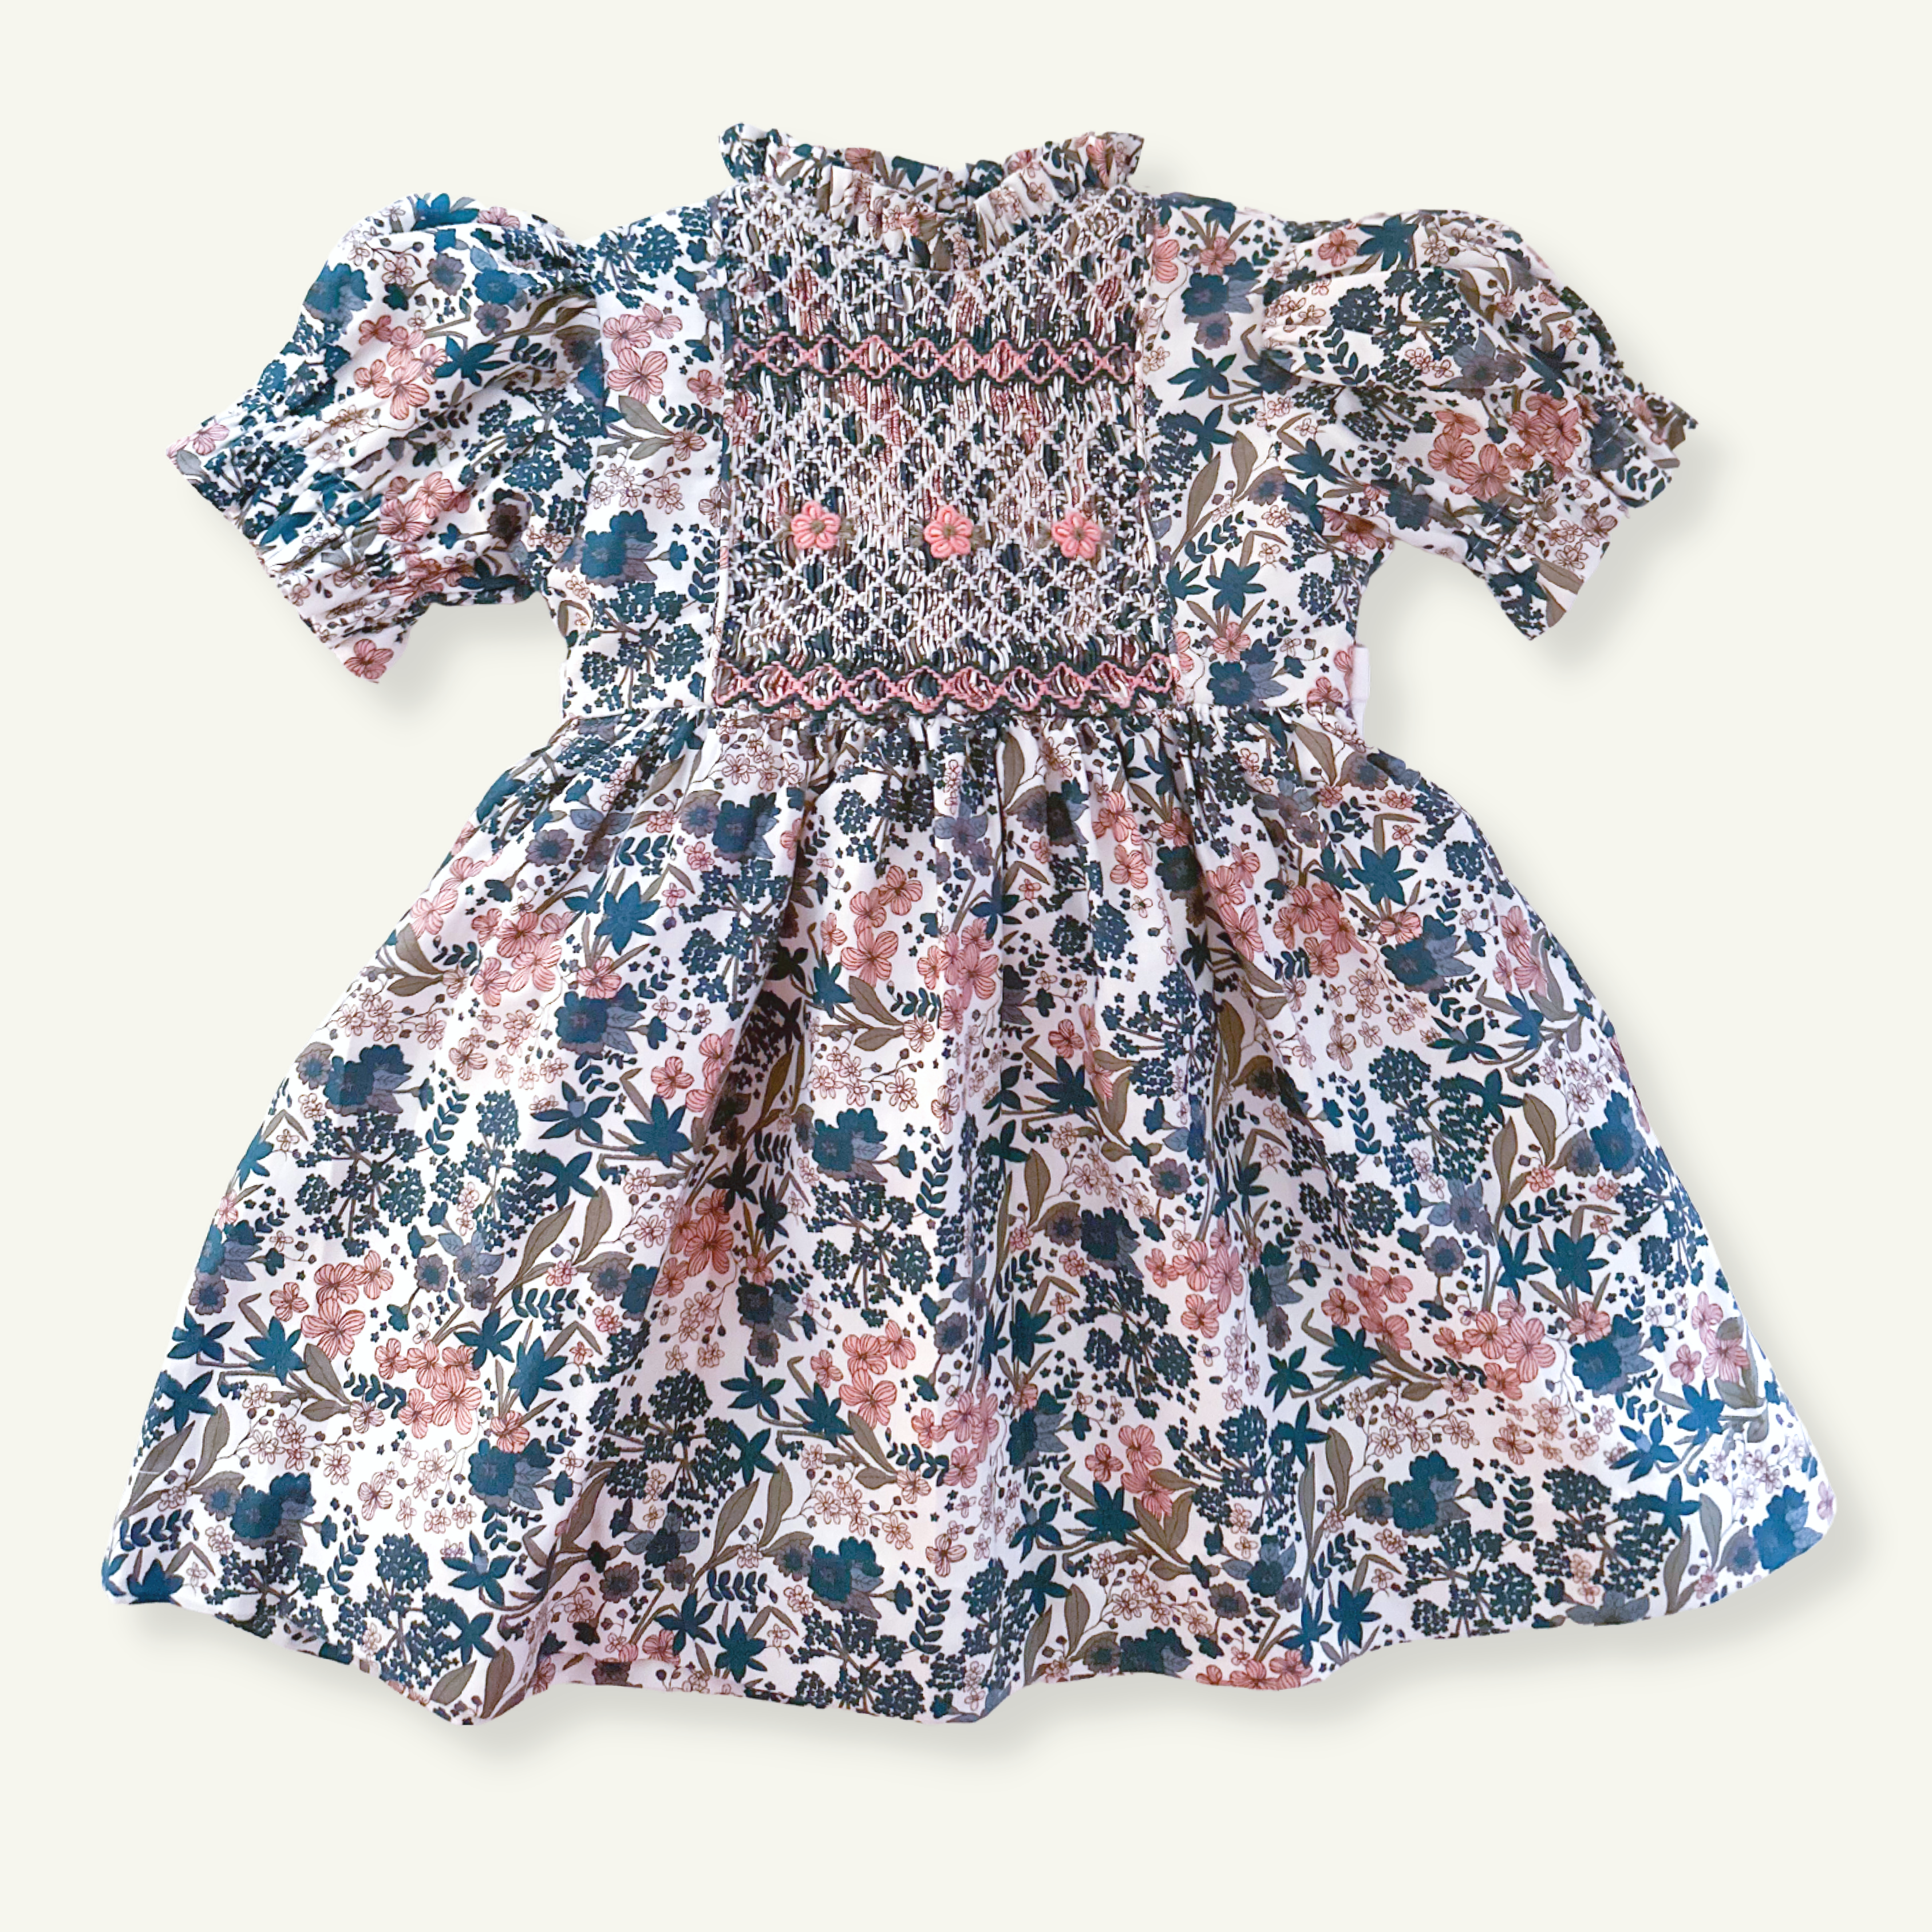 ** SECONDS SALE ** The hand smocked ROMANE dress - Floral